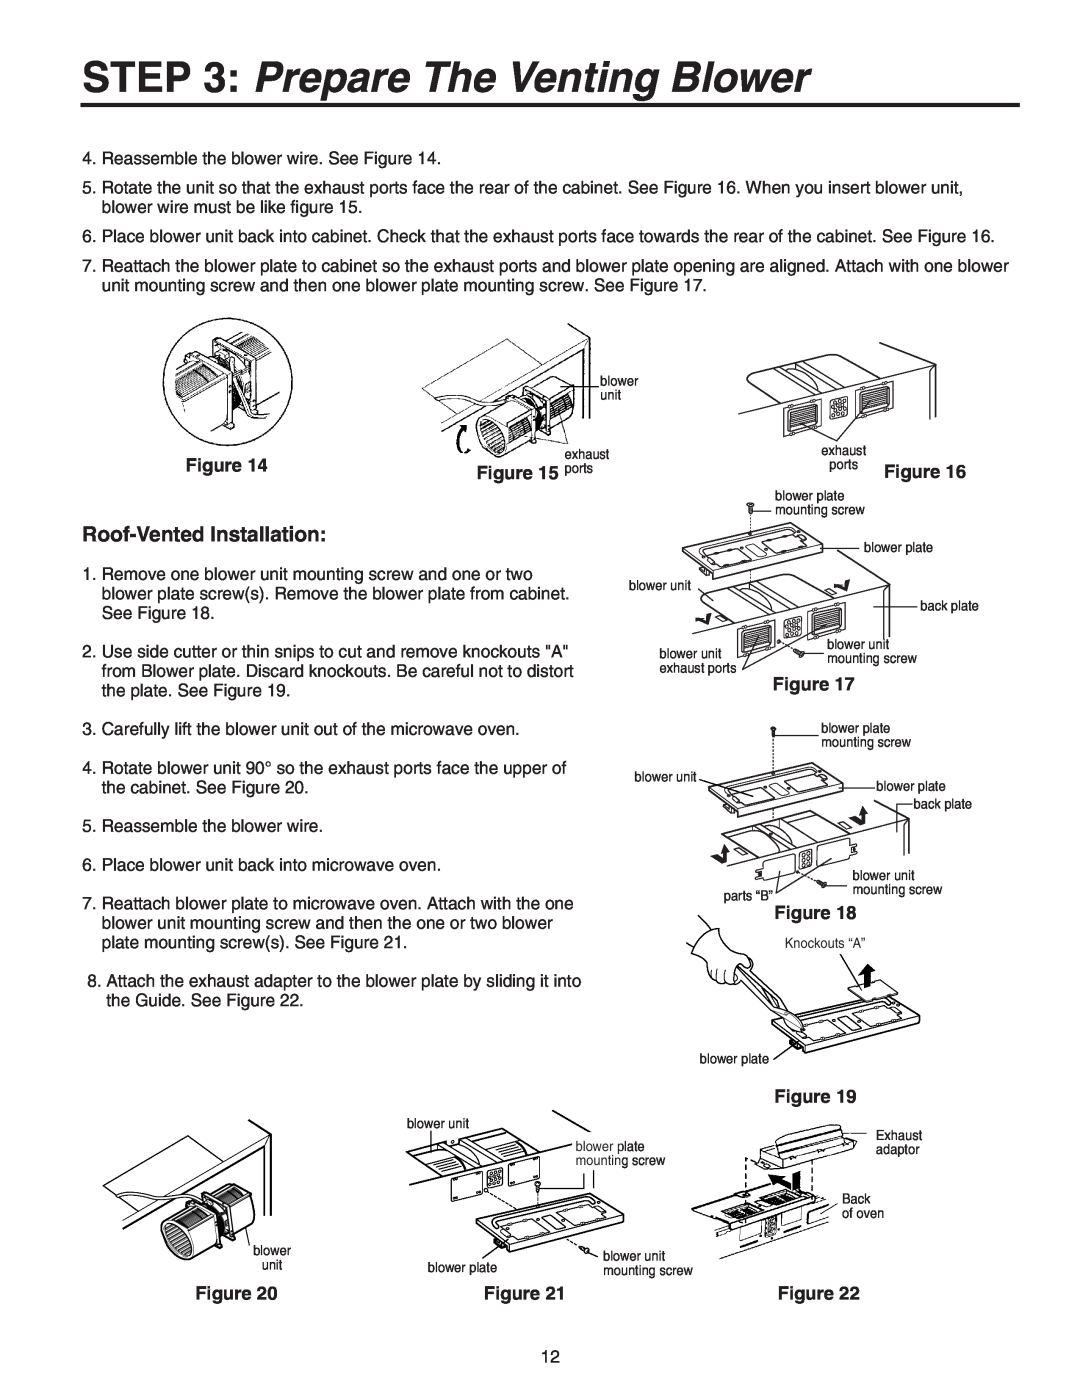 Maytag 8101P641-60 installation instructions Roof-Vented Installation, Prepare The Venting Blower, ports 